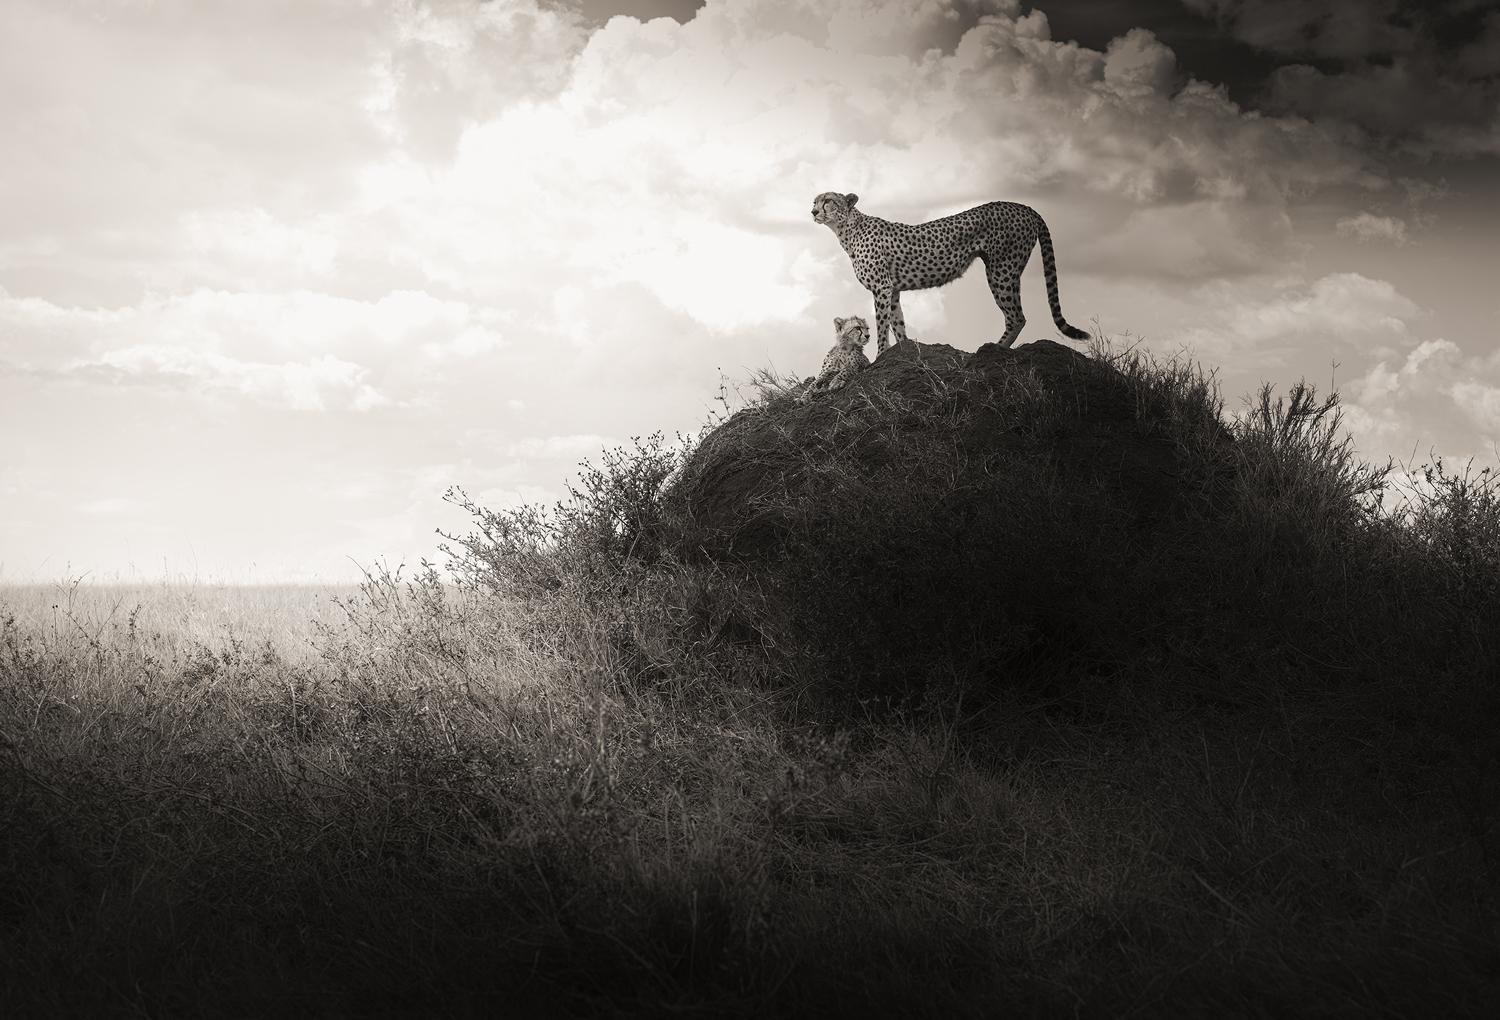 Joachim Schmeisser Black and White Photograph - Lean on Me, contemporary, black and white, animal, Africa, Photography, Cheetah